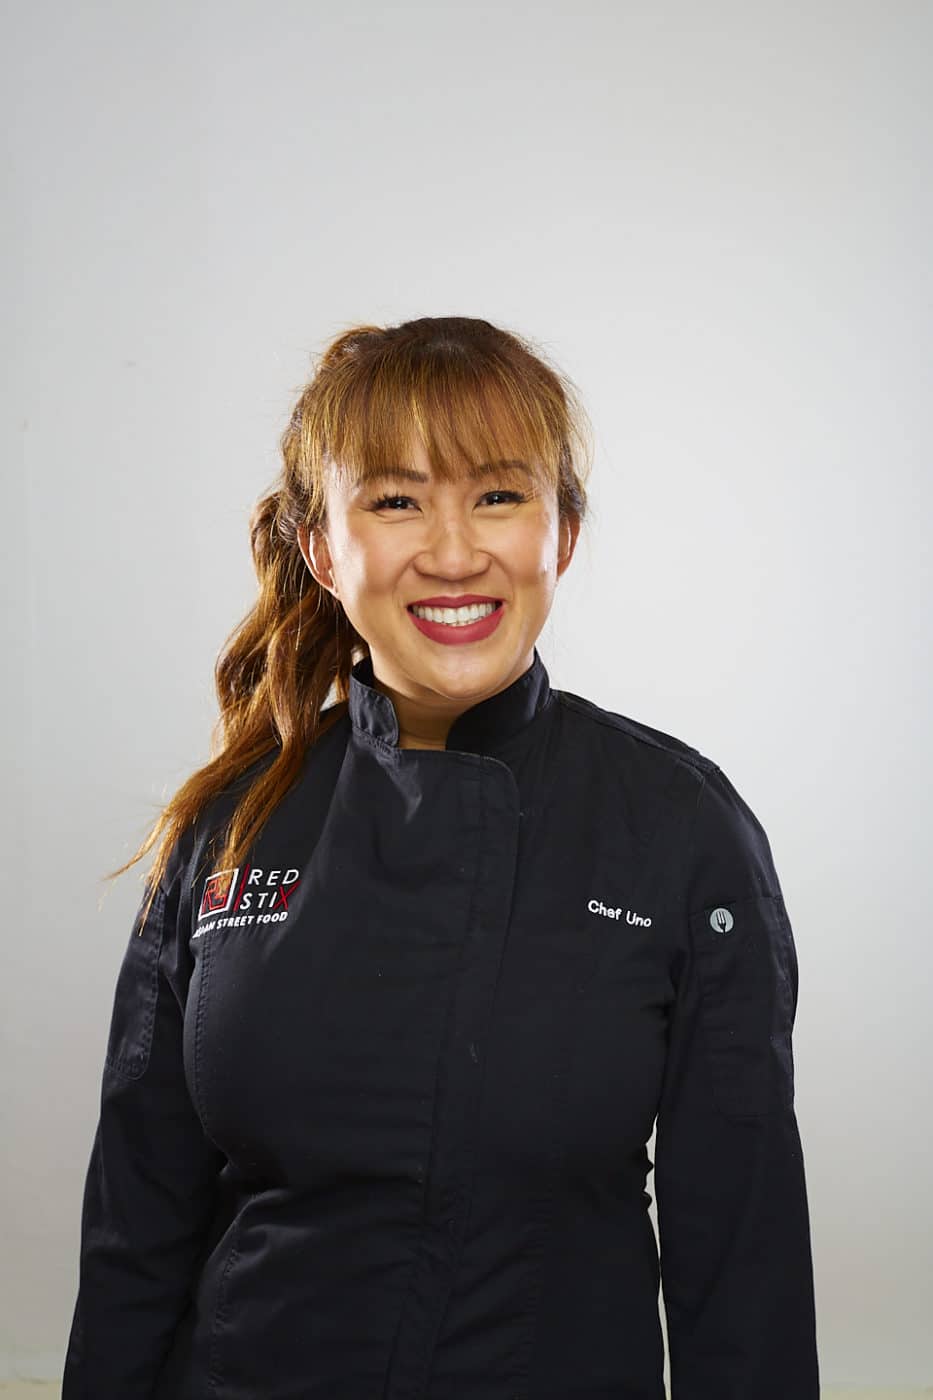 Woman with black chef top and brown hair and smiling